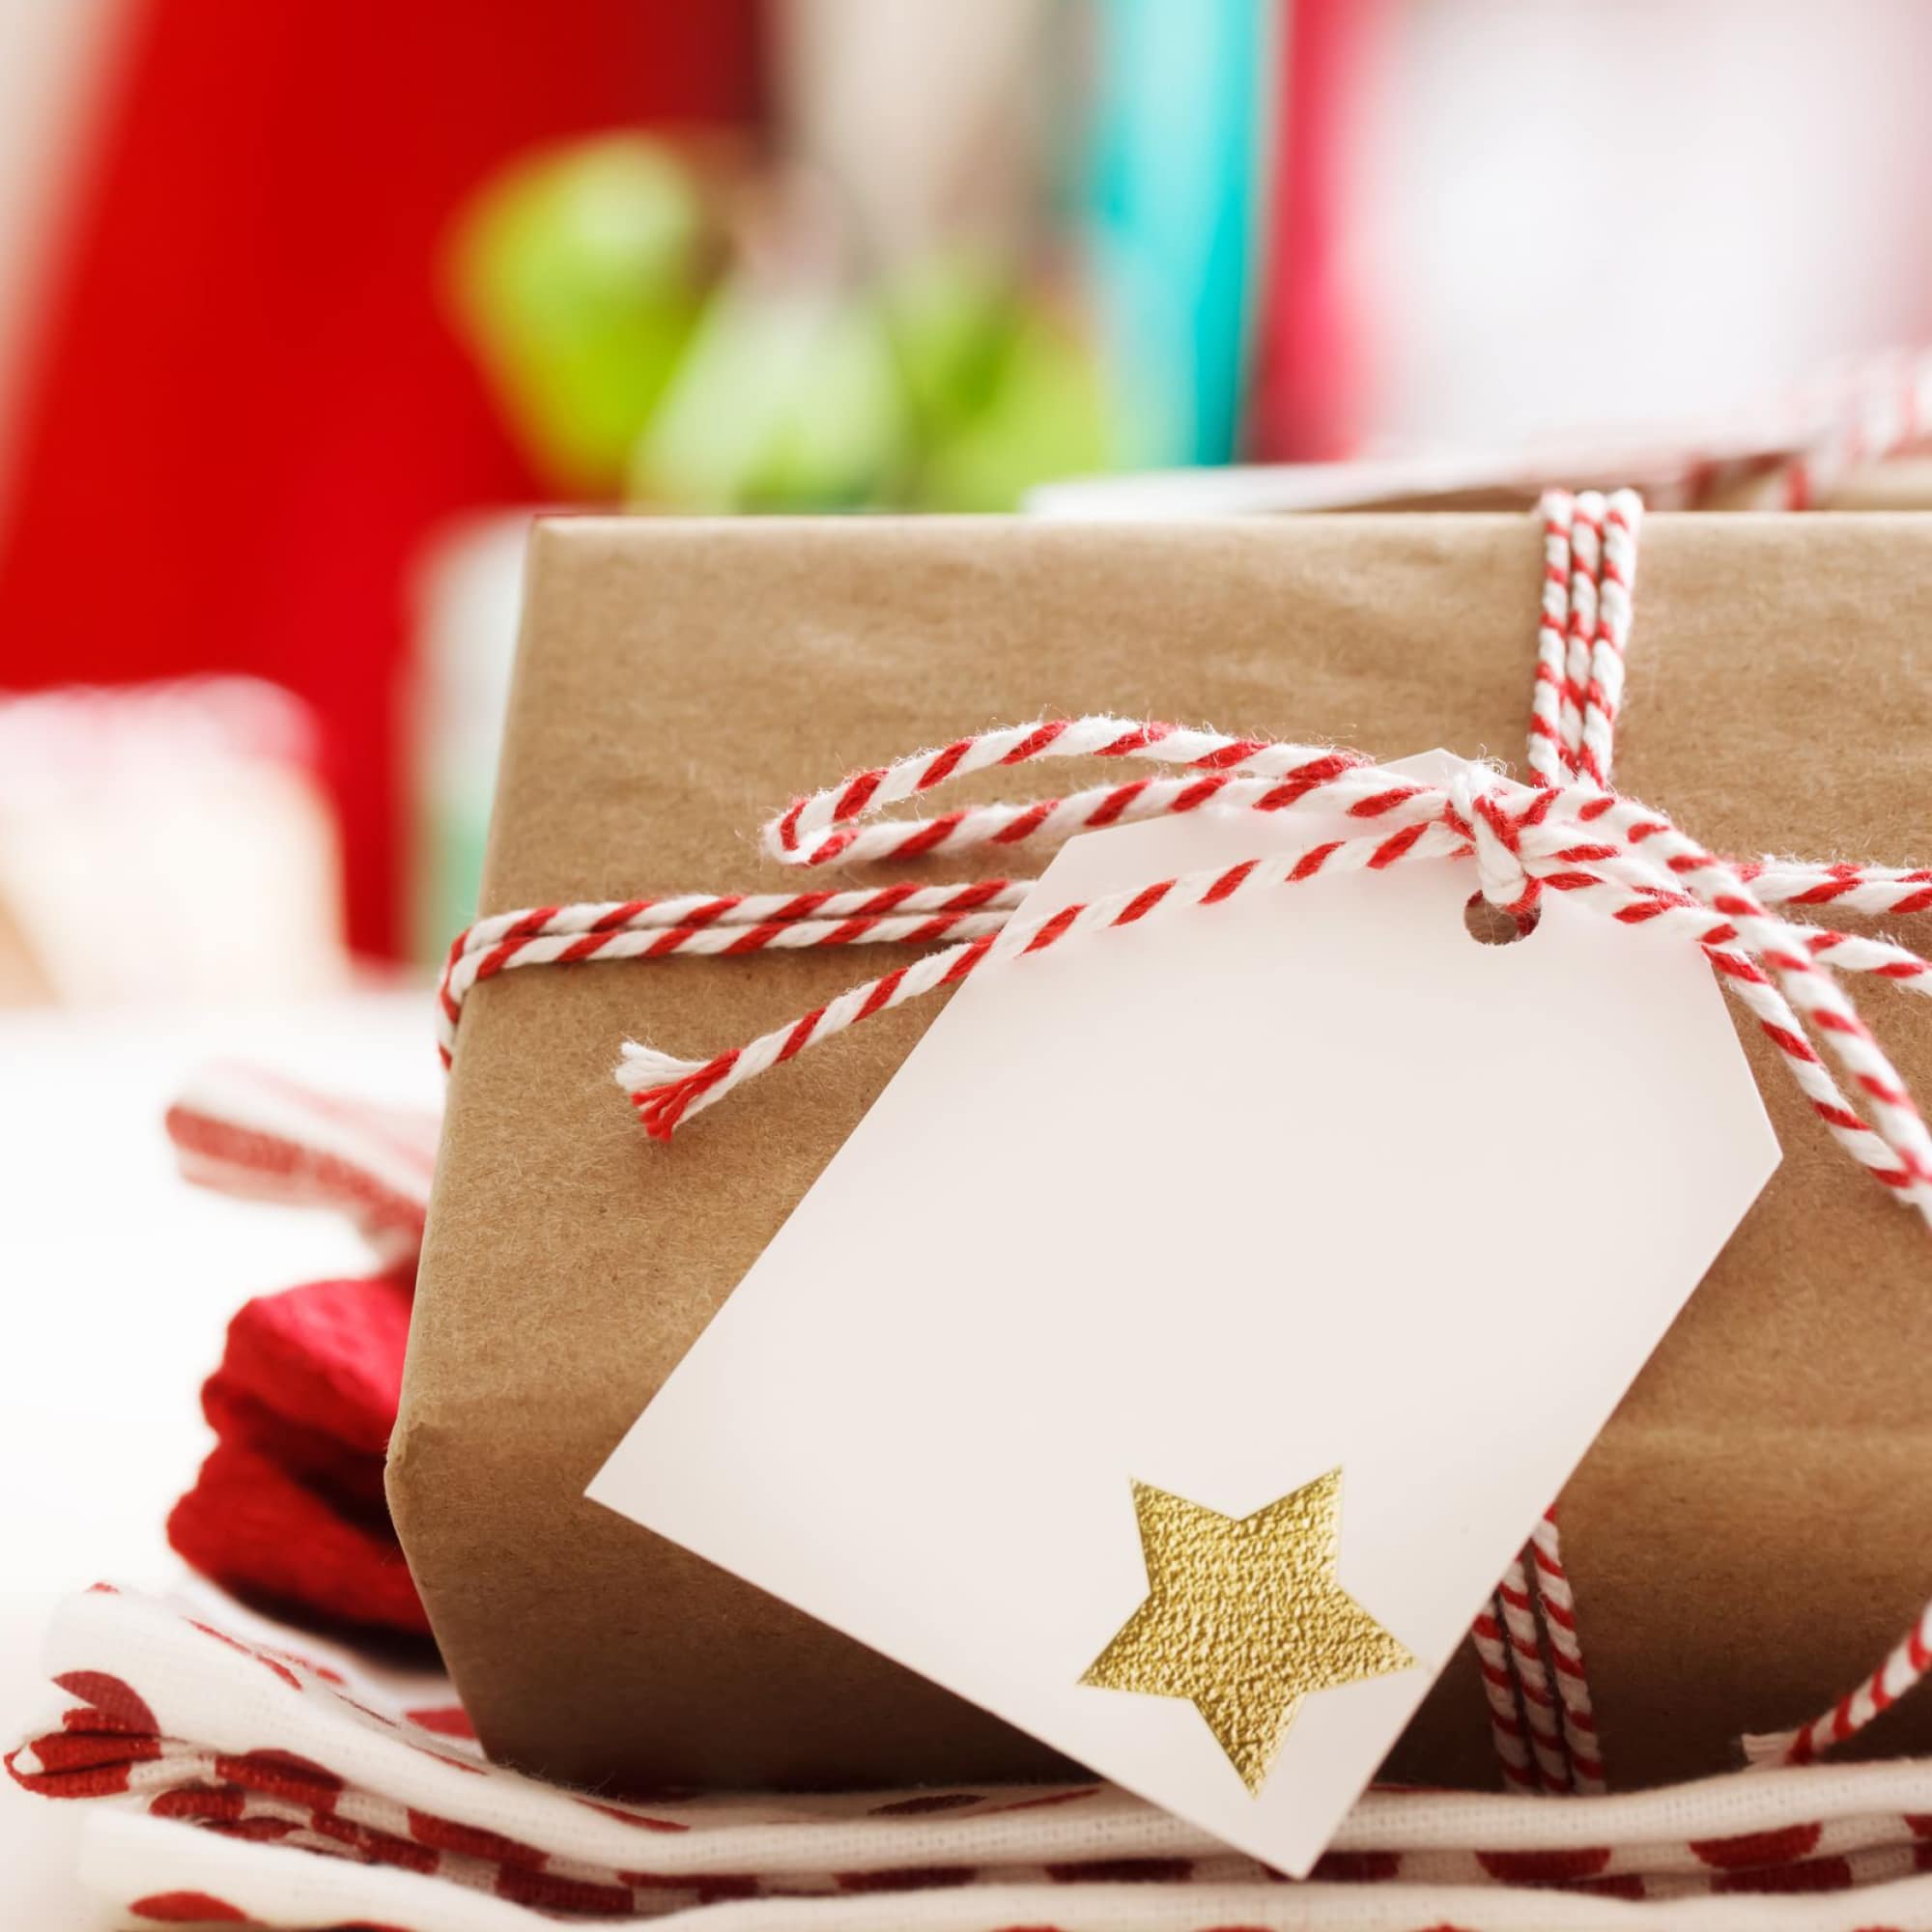 How to Give a Great Handmade Gift | Living Well Spending Less®